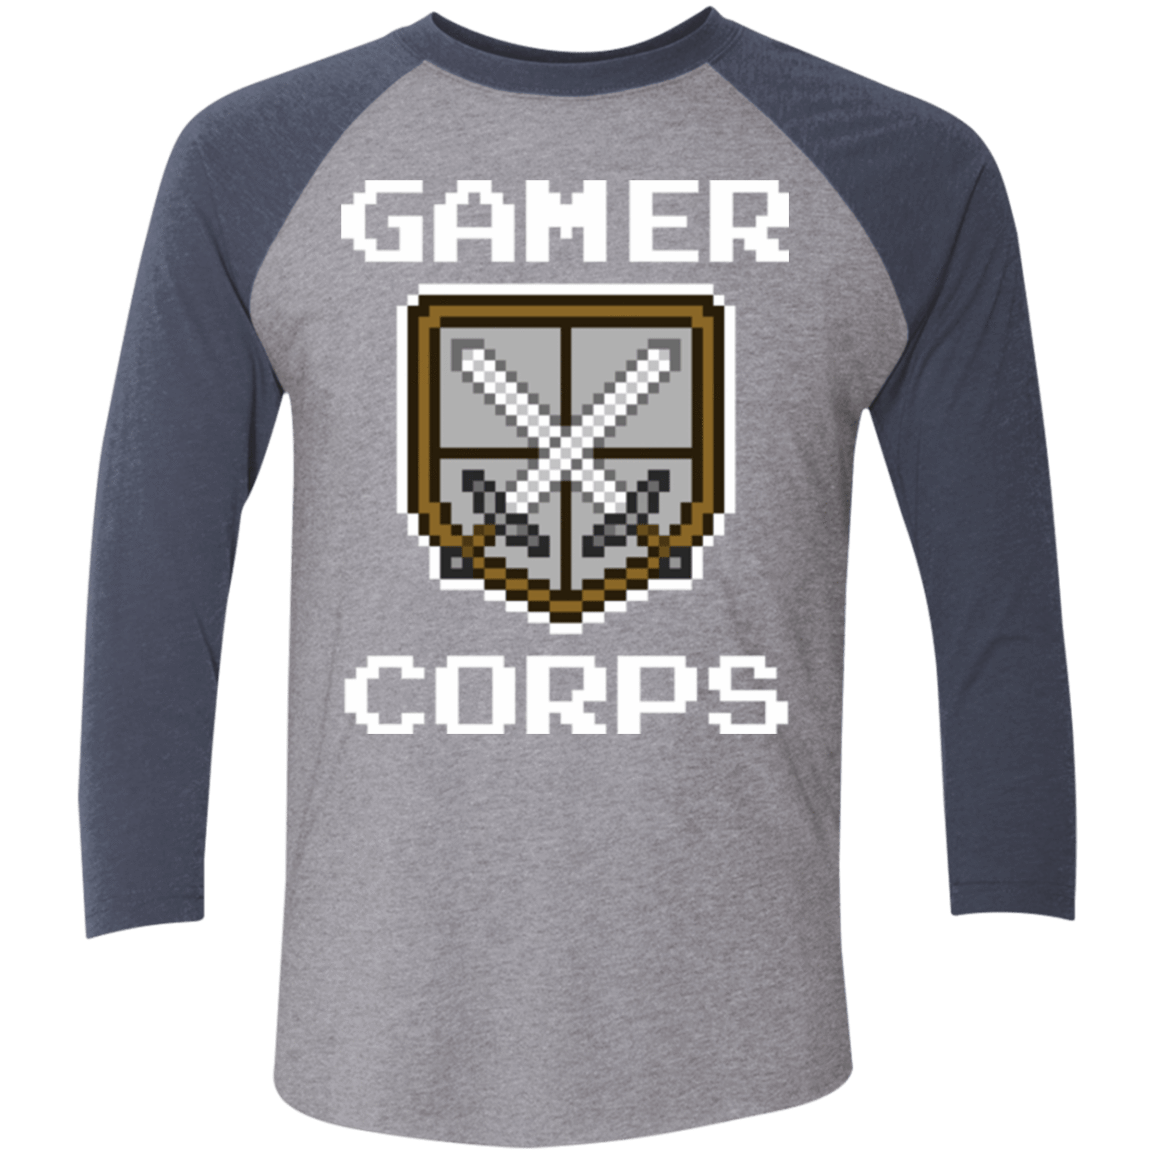 T-Shirts Premium Heather/ Vintage Navy / X-Small Gamer corps Men's Triblend 3/4 Sleeve